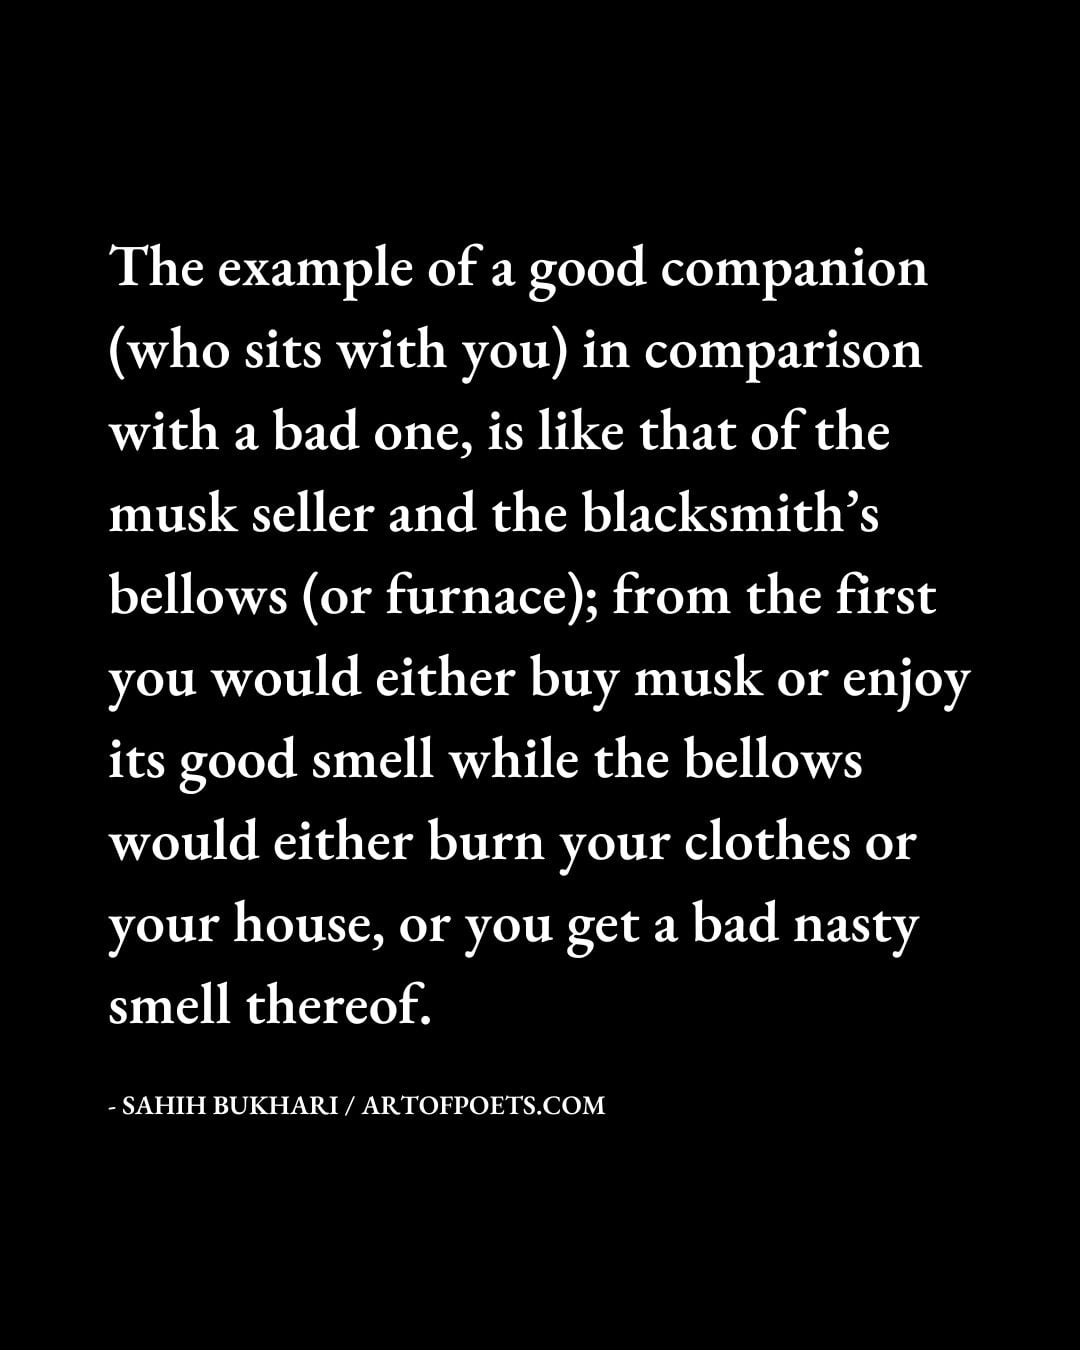 The example of a good companion who sits with you in comparison with a bad one is like that of the musk seller